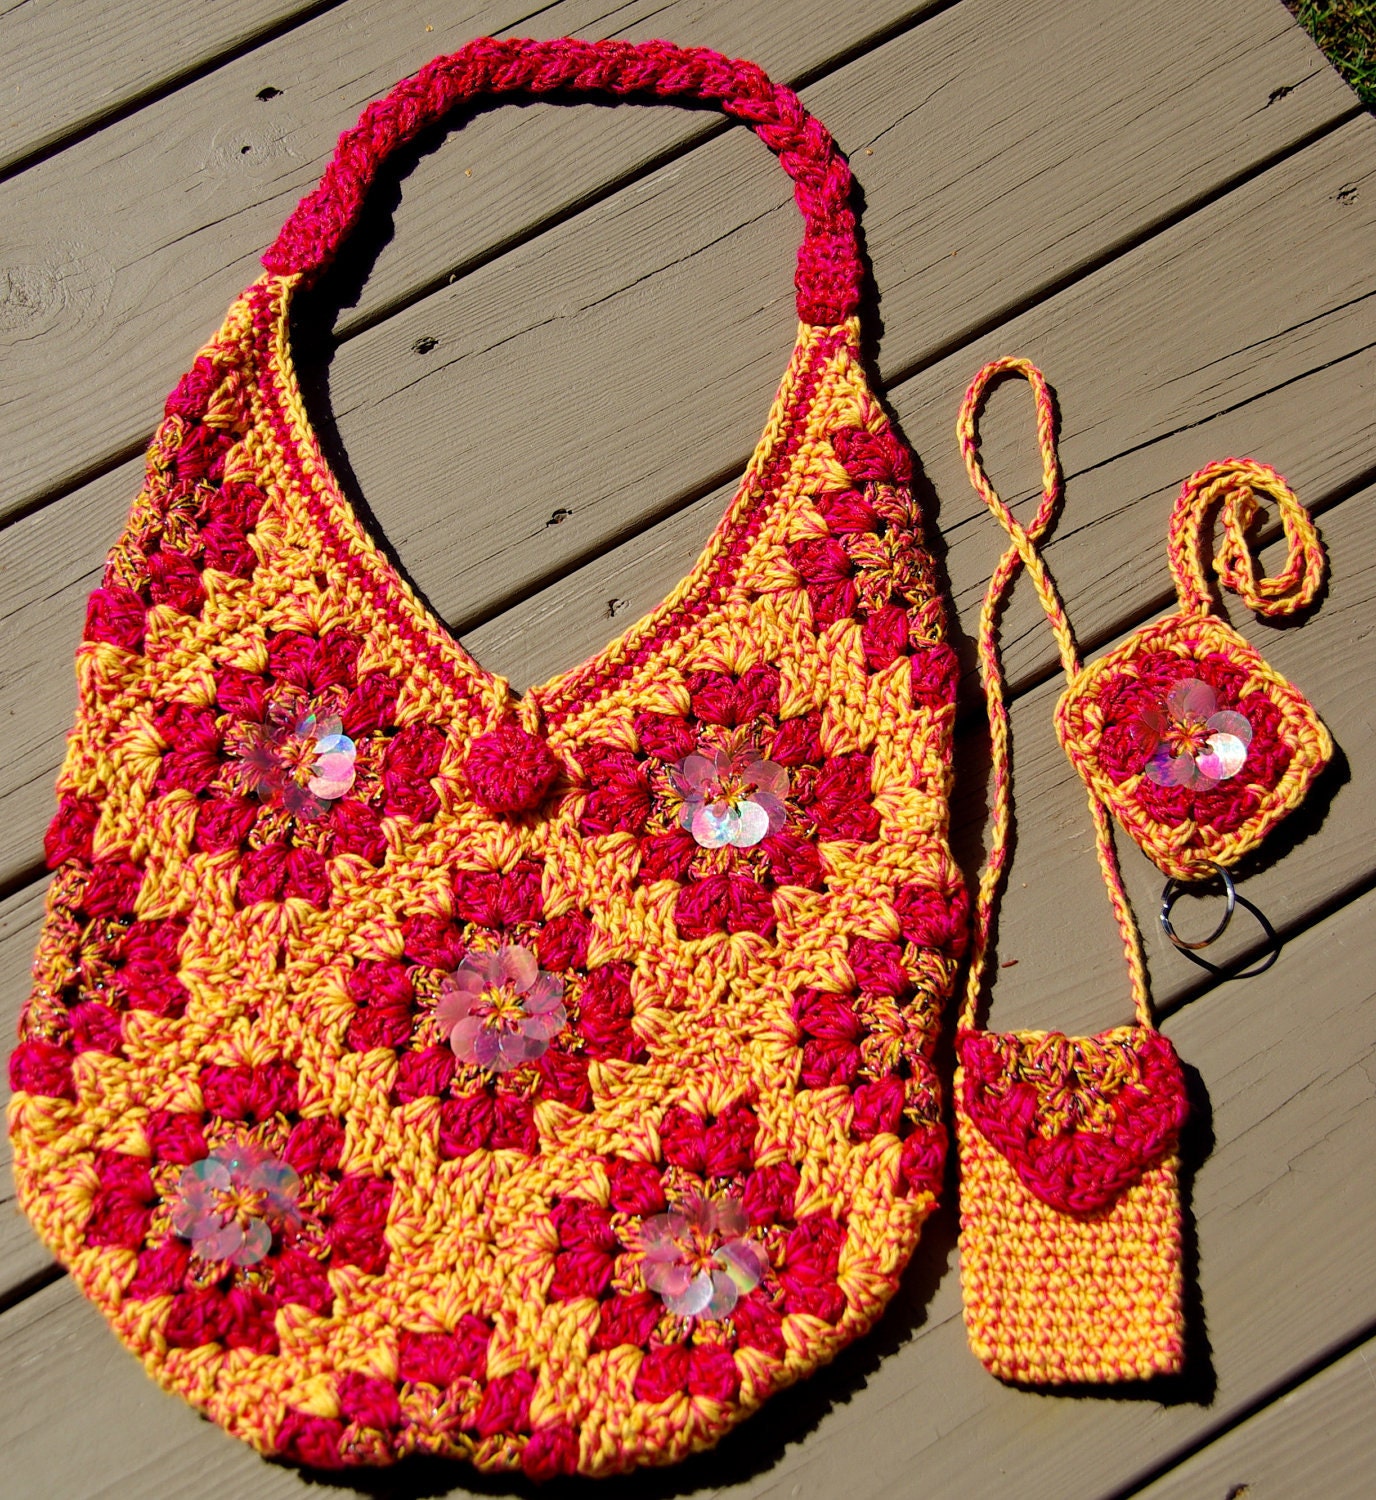 Crochet Granny Square Bag Set with Fall Bling